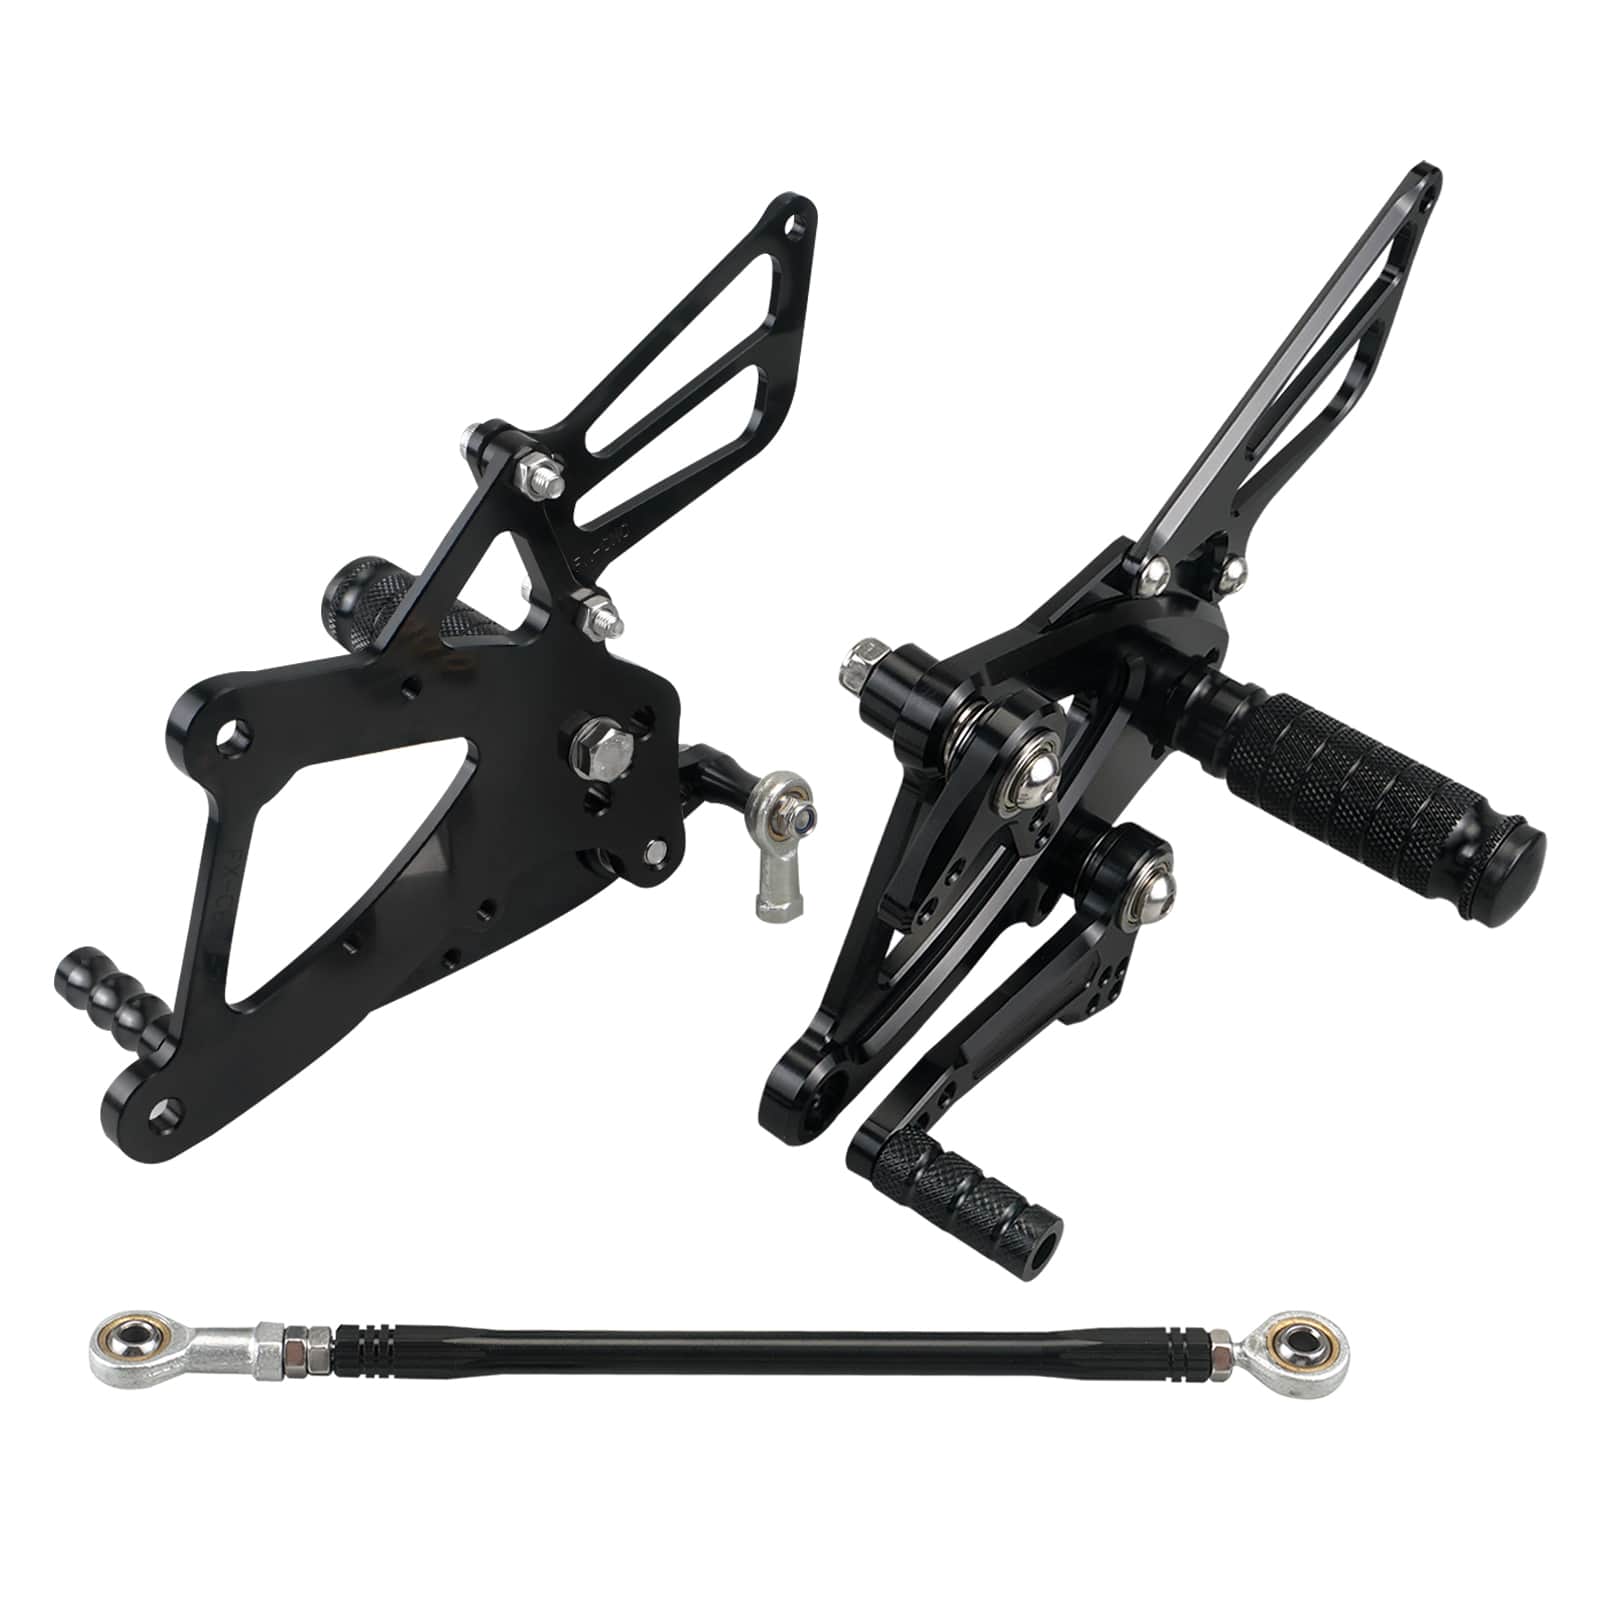 Race Adjustable Rearsets Foot Pegs Pedals For Honda CB 400F 500F / CBR 400R 500R